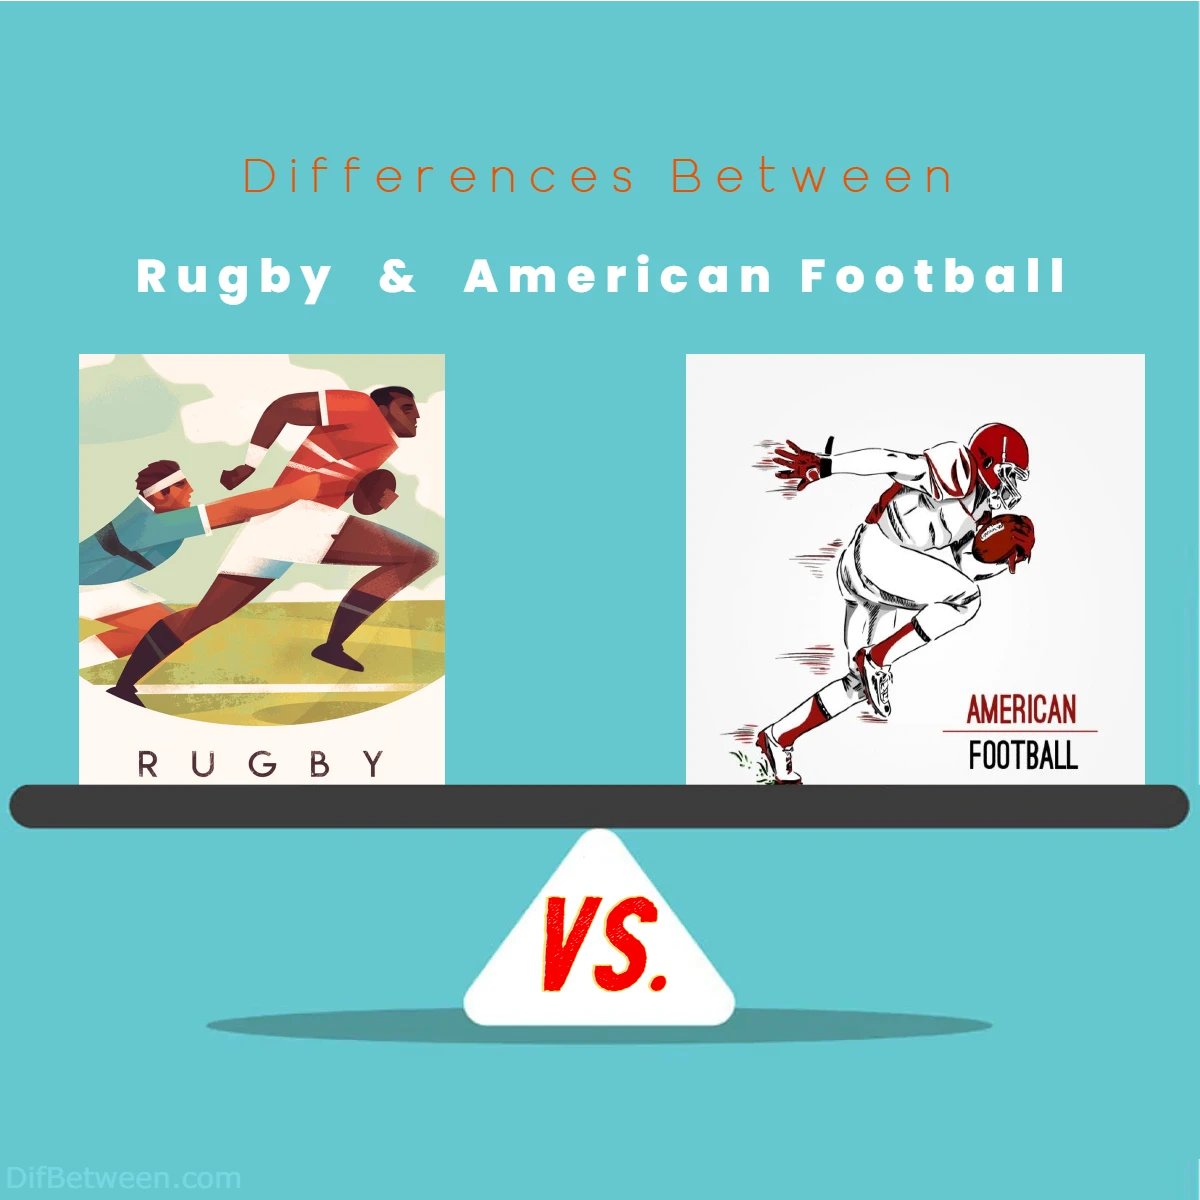 Differences Between Rugby vs American Football